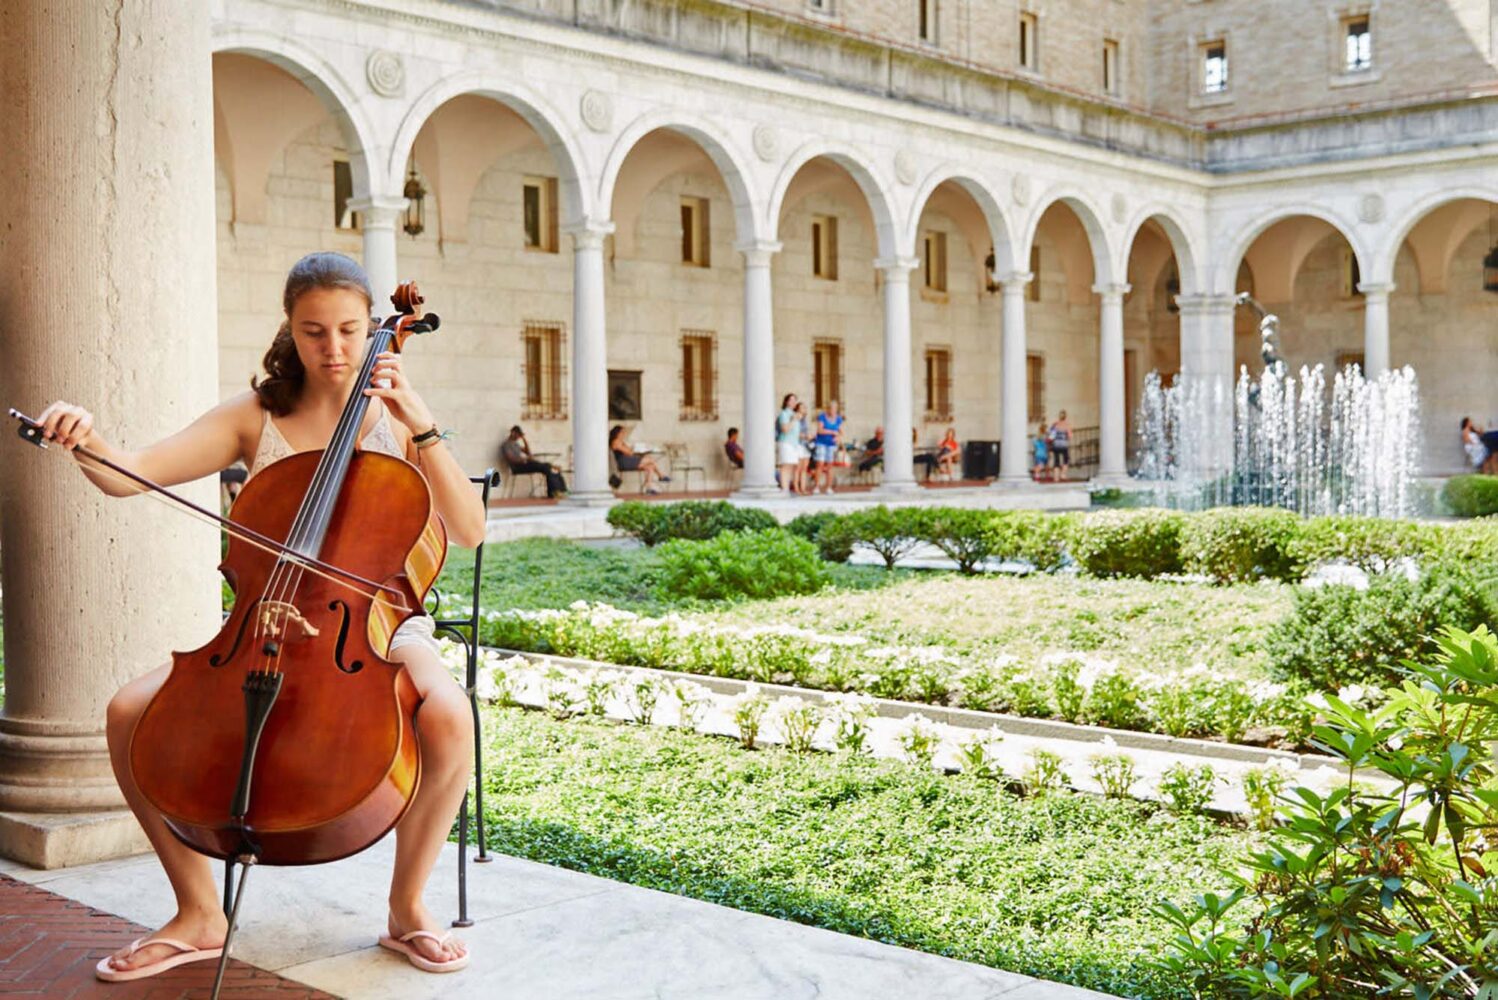 Photo: A picture of a woman playing the cello outside in a courtyard surrounded by greenery with a fountain in the background